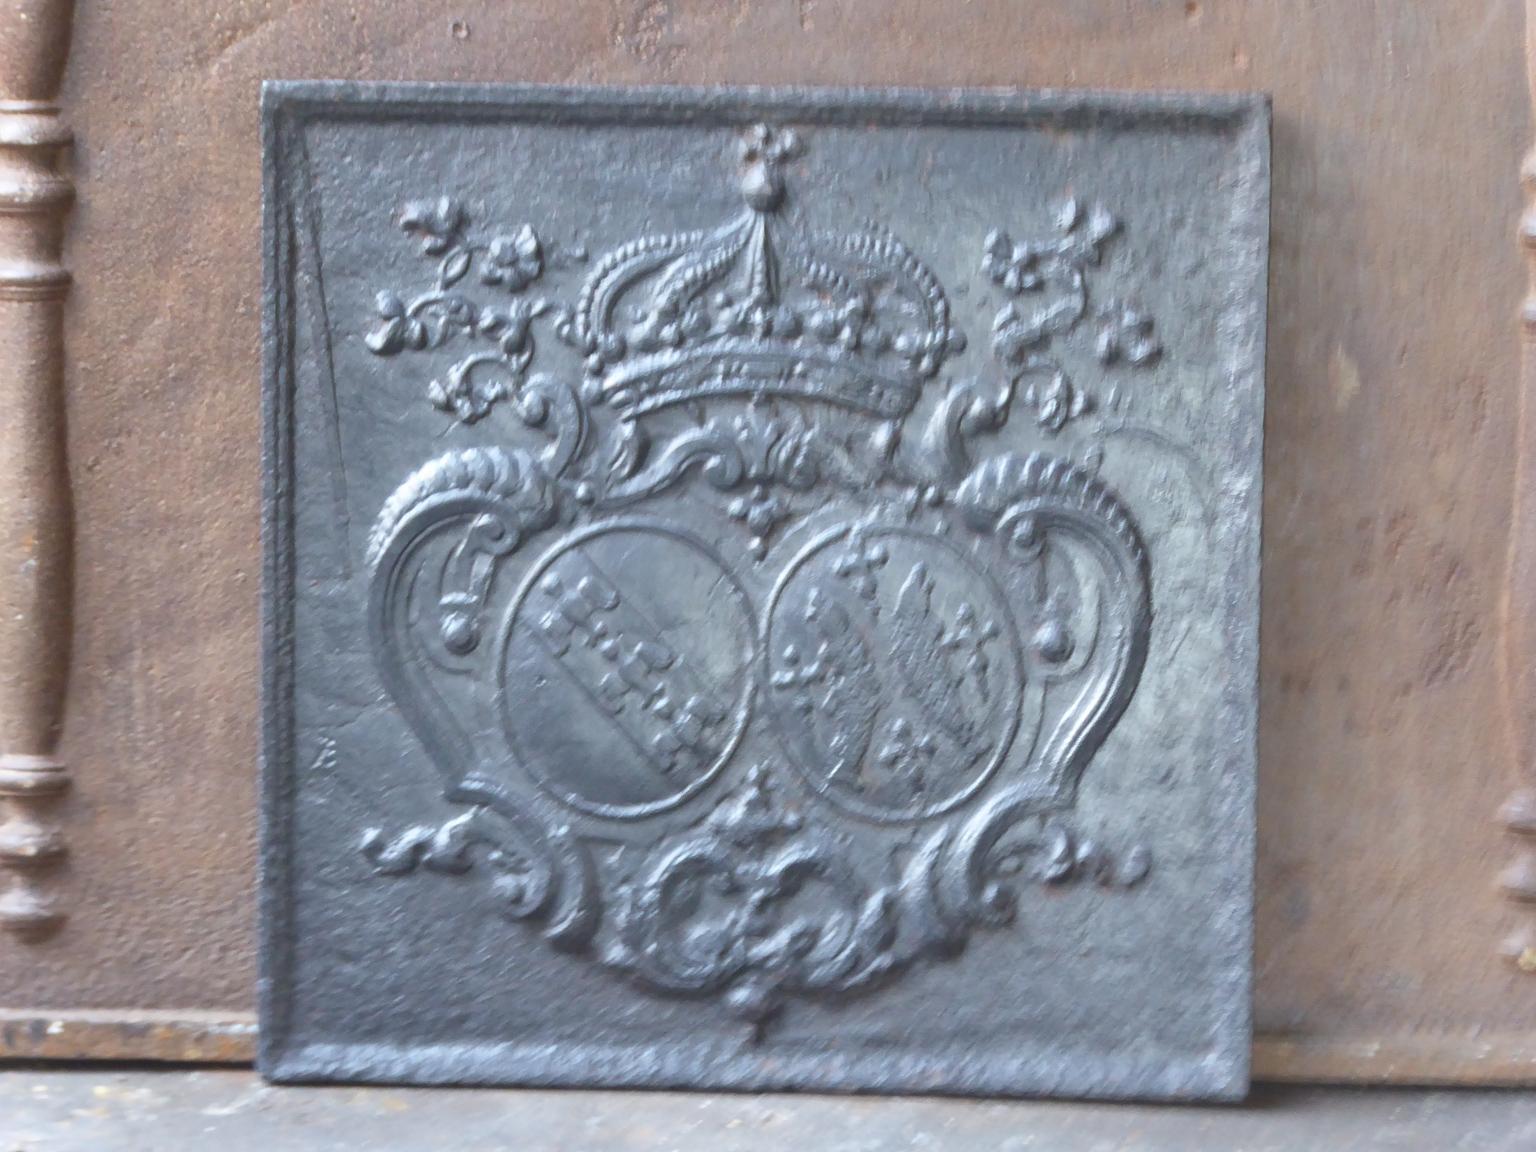 18th century French Louis XV fireback with a coat of arms. The fireback is made of cast iron and has a pewter / black color. The fireback is in a good condition and has no cracks.








